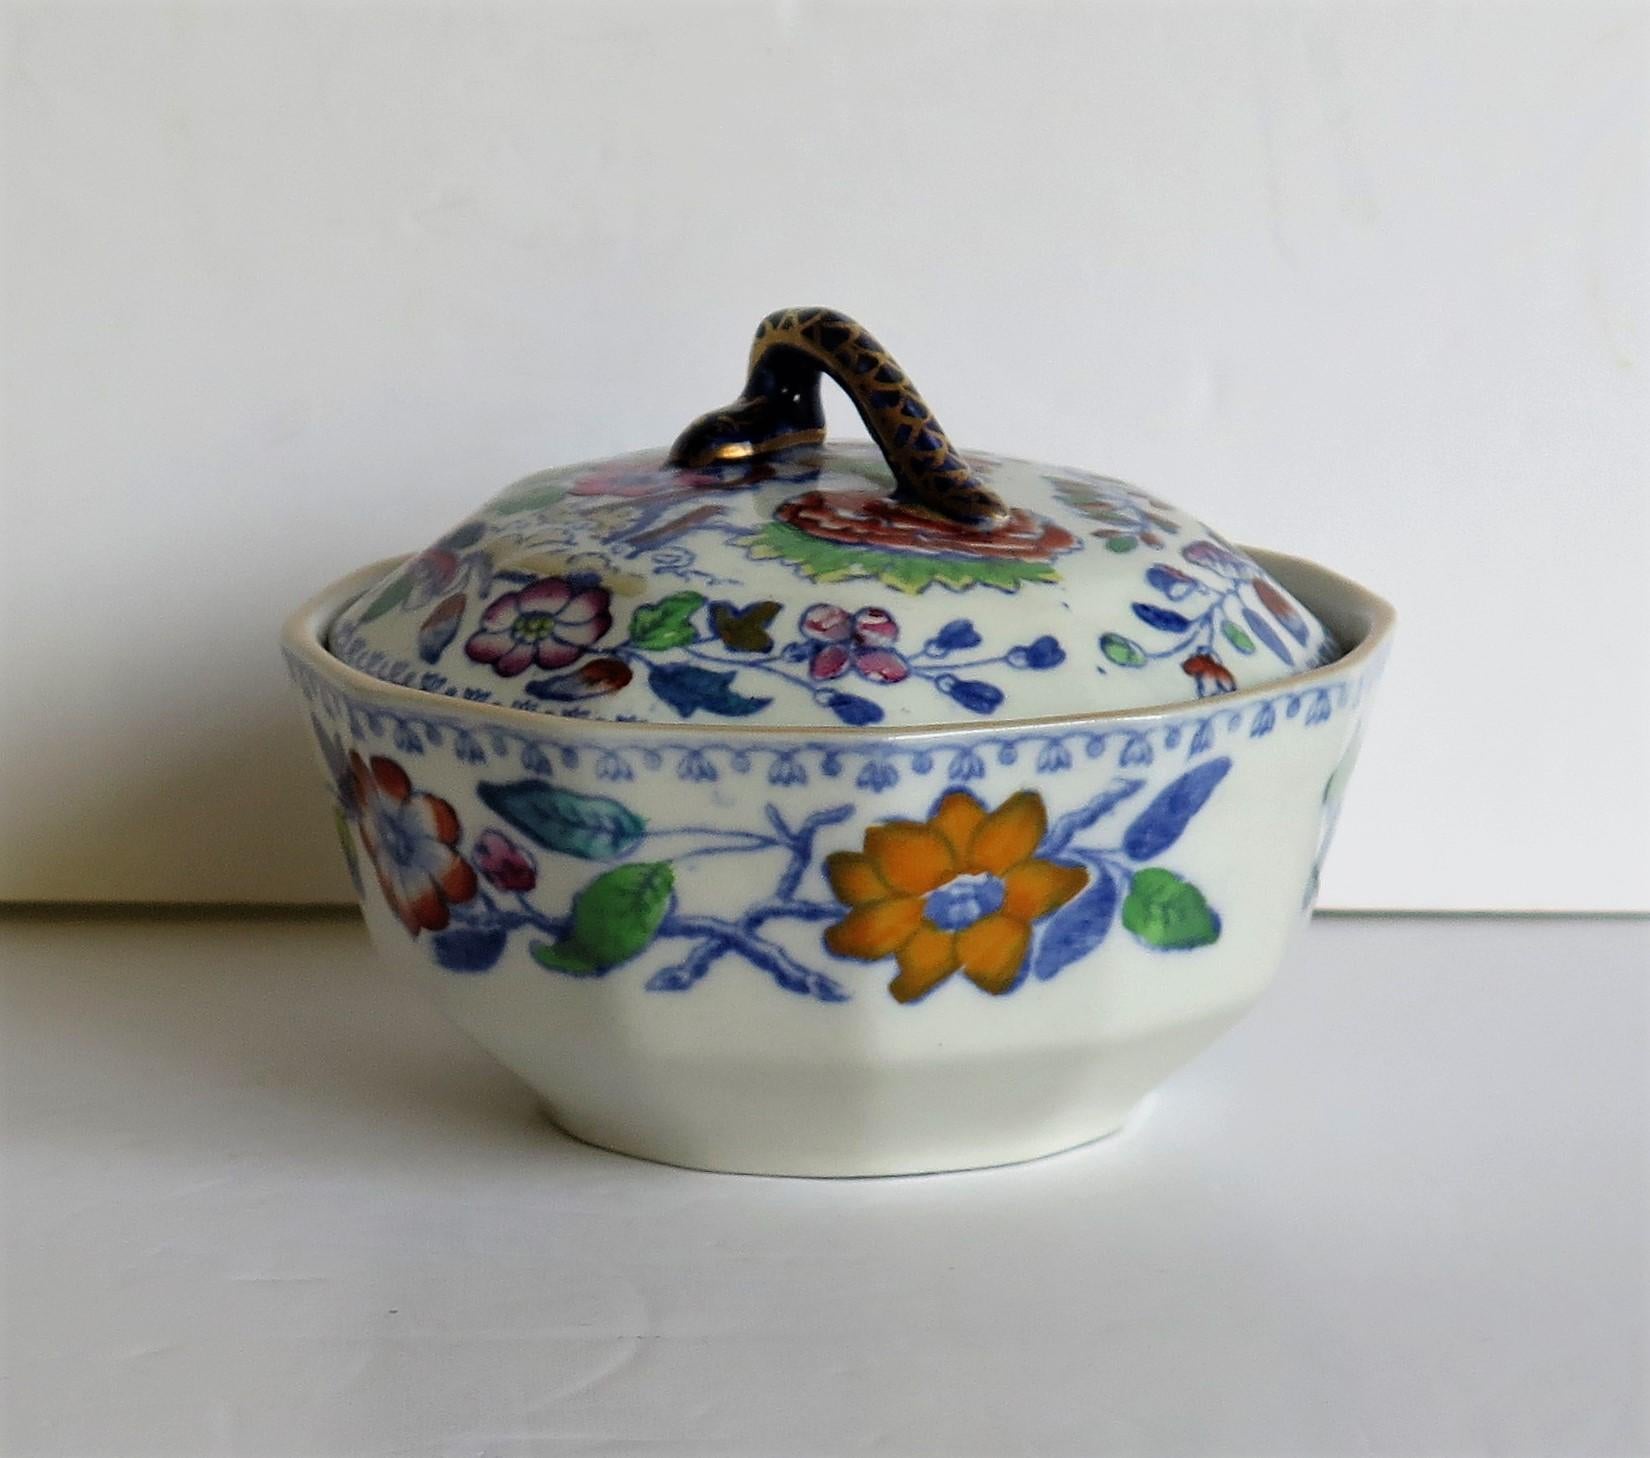 Mason's Ironstone Lidded Dish or Bowl in Flying Bird Pattern, circa 1890 In Good Condition For Sale In Lincoln, Lincolnshire